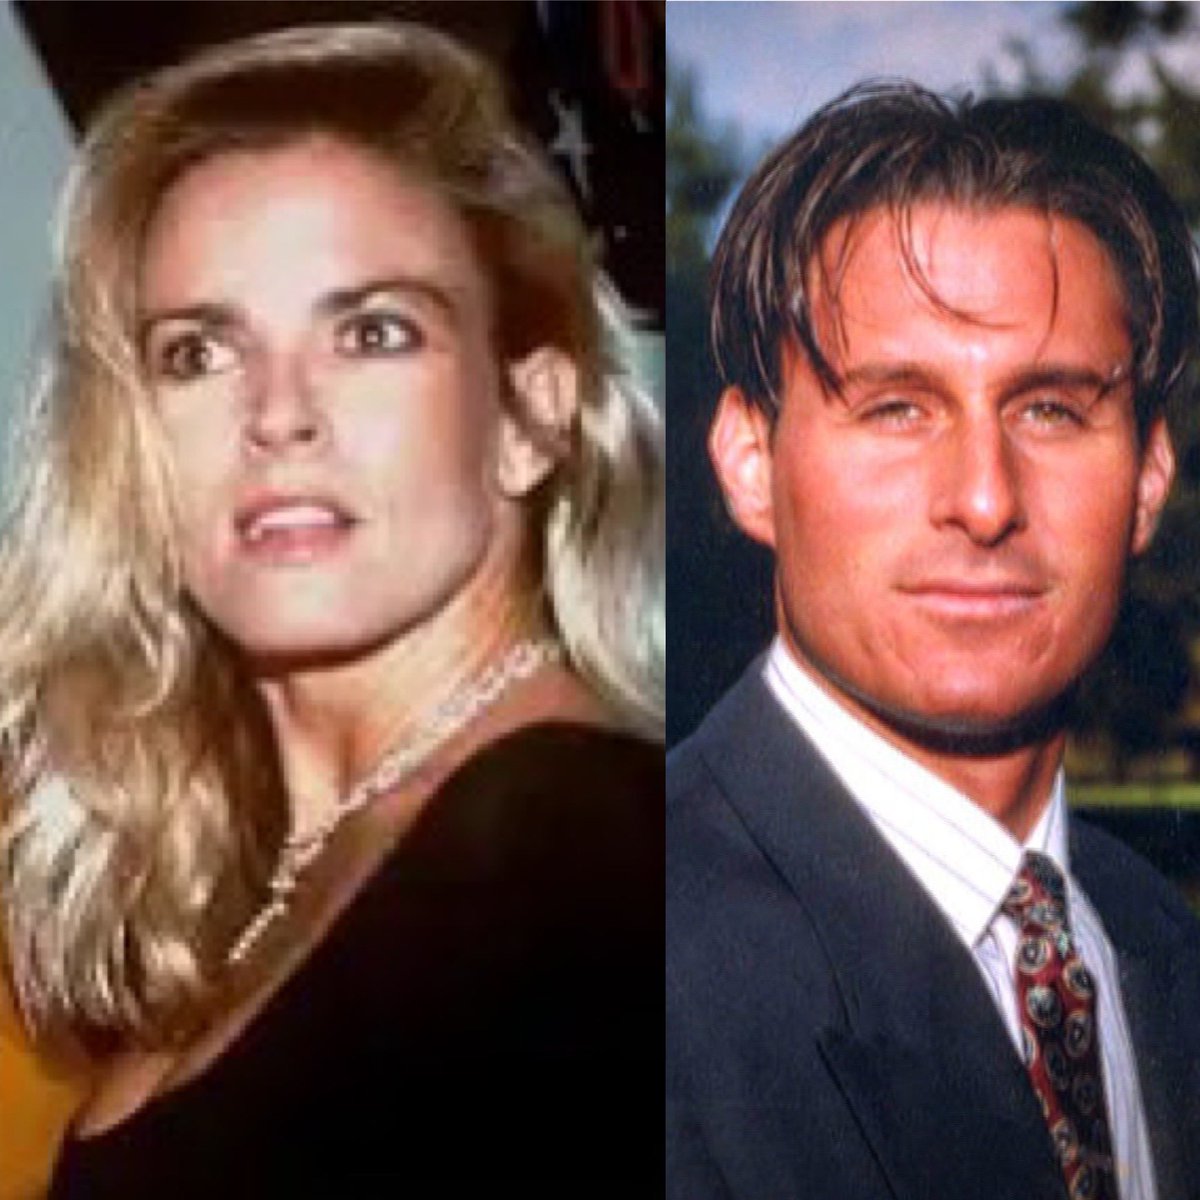 Nicole Brown Goldman would have been 65 next month. Ron Goldman would have been 56 in July. Instead, they were brutally murdered 30 years ago this June. That’s what we should remember today, not the passing of the guy many of us believe did it.